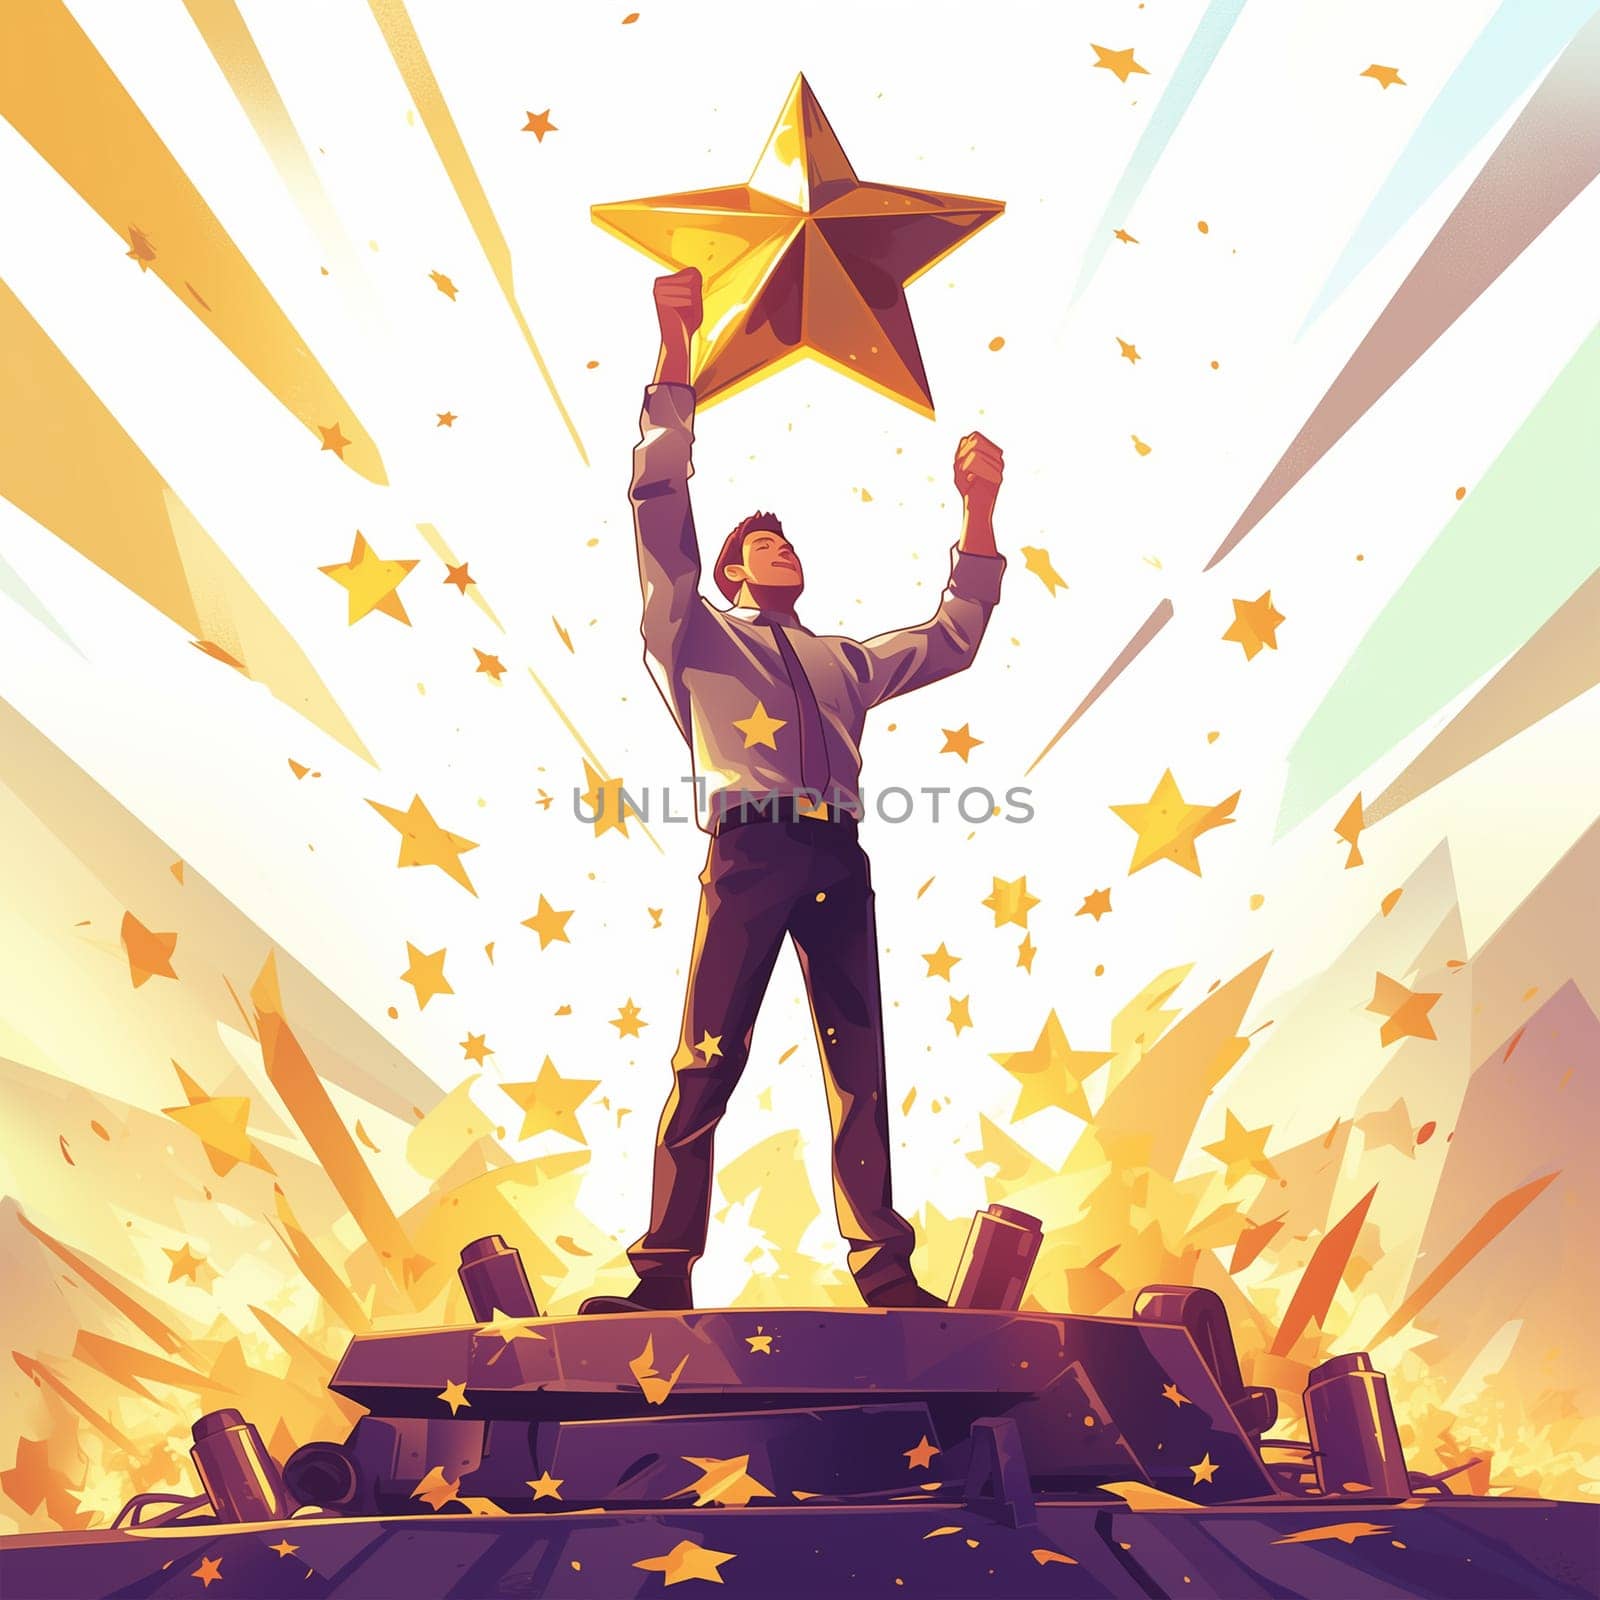 Triumph of Success: Businessman Grasping a Golden Star Amongst Shimmering Lights by Sd28DimoN_1976